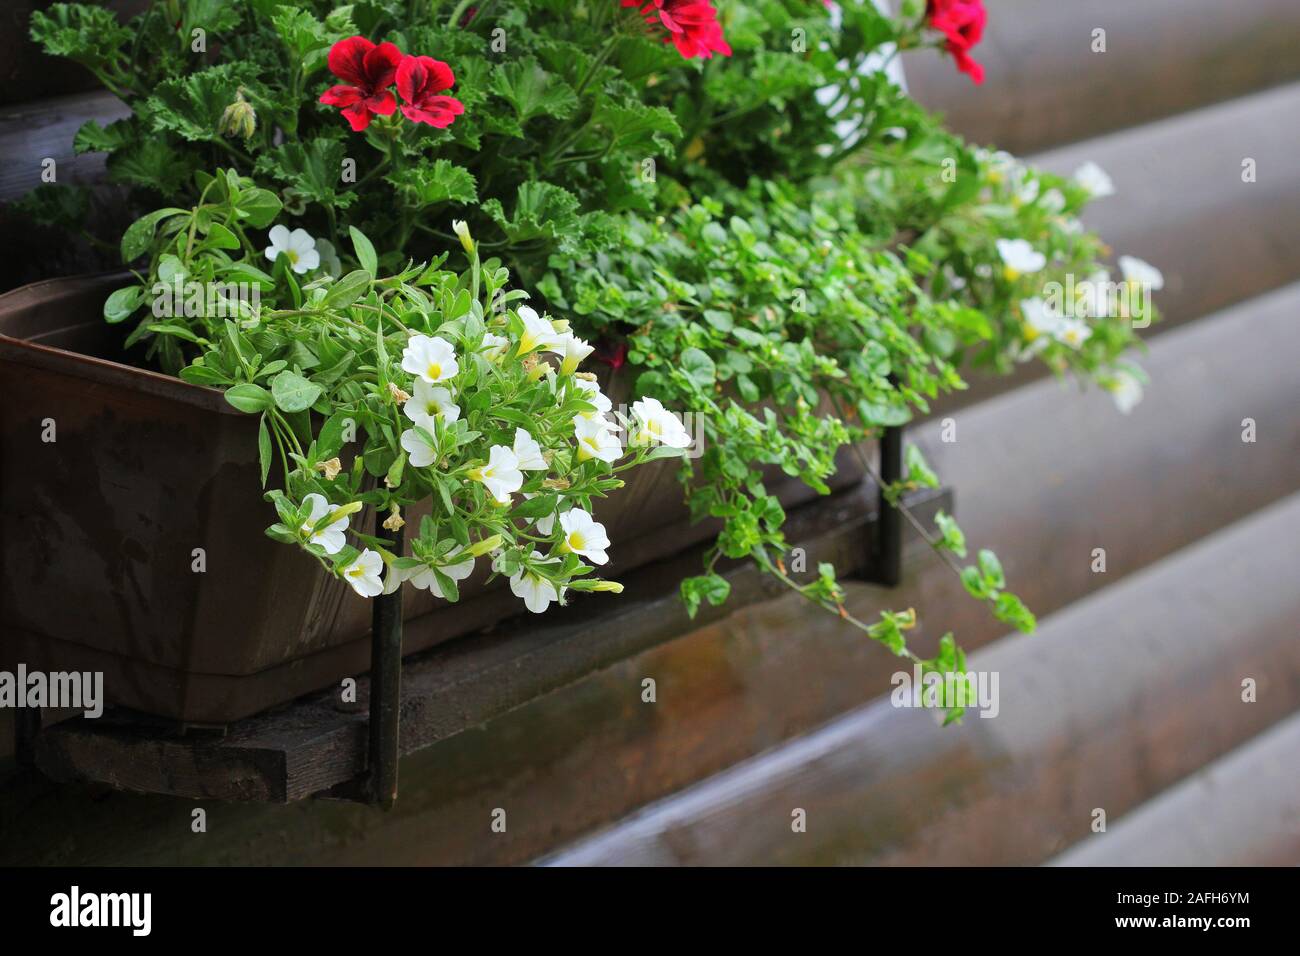 Red and white flowering plants in a flower box in the window sill . Geranium, petunia and bacopa flower growth in pot Stock Photo